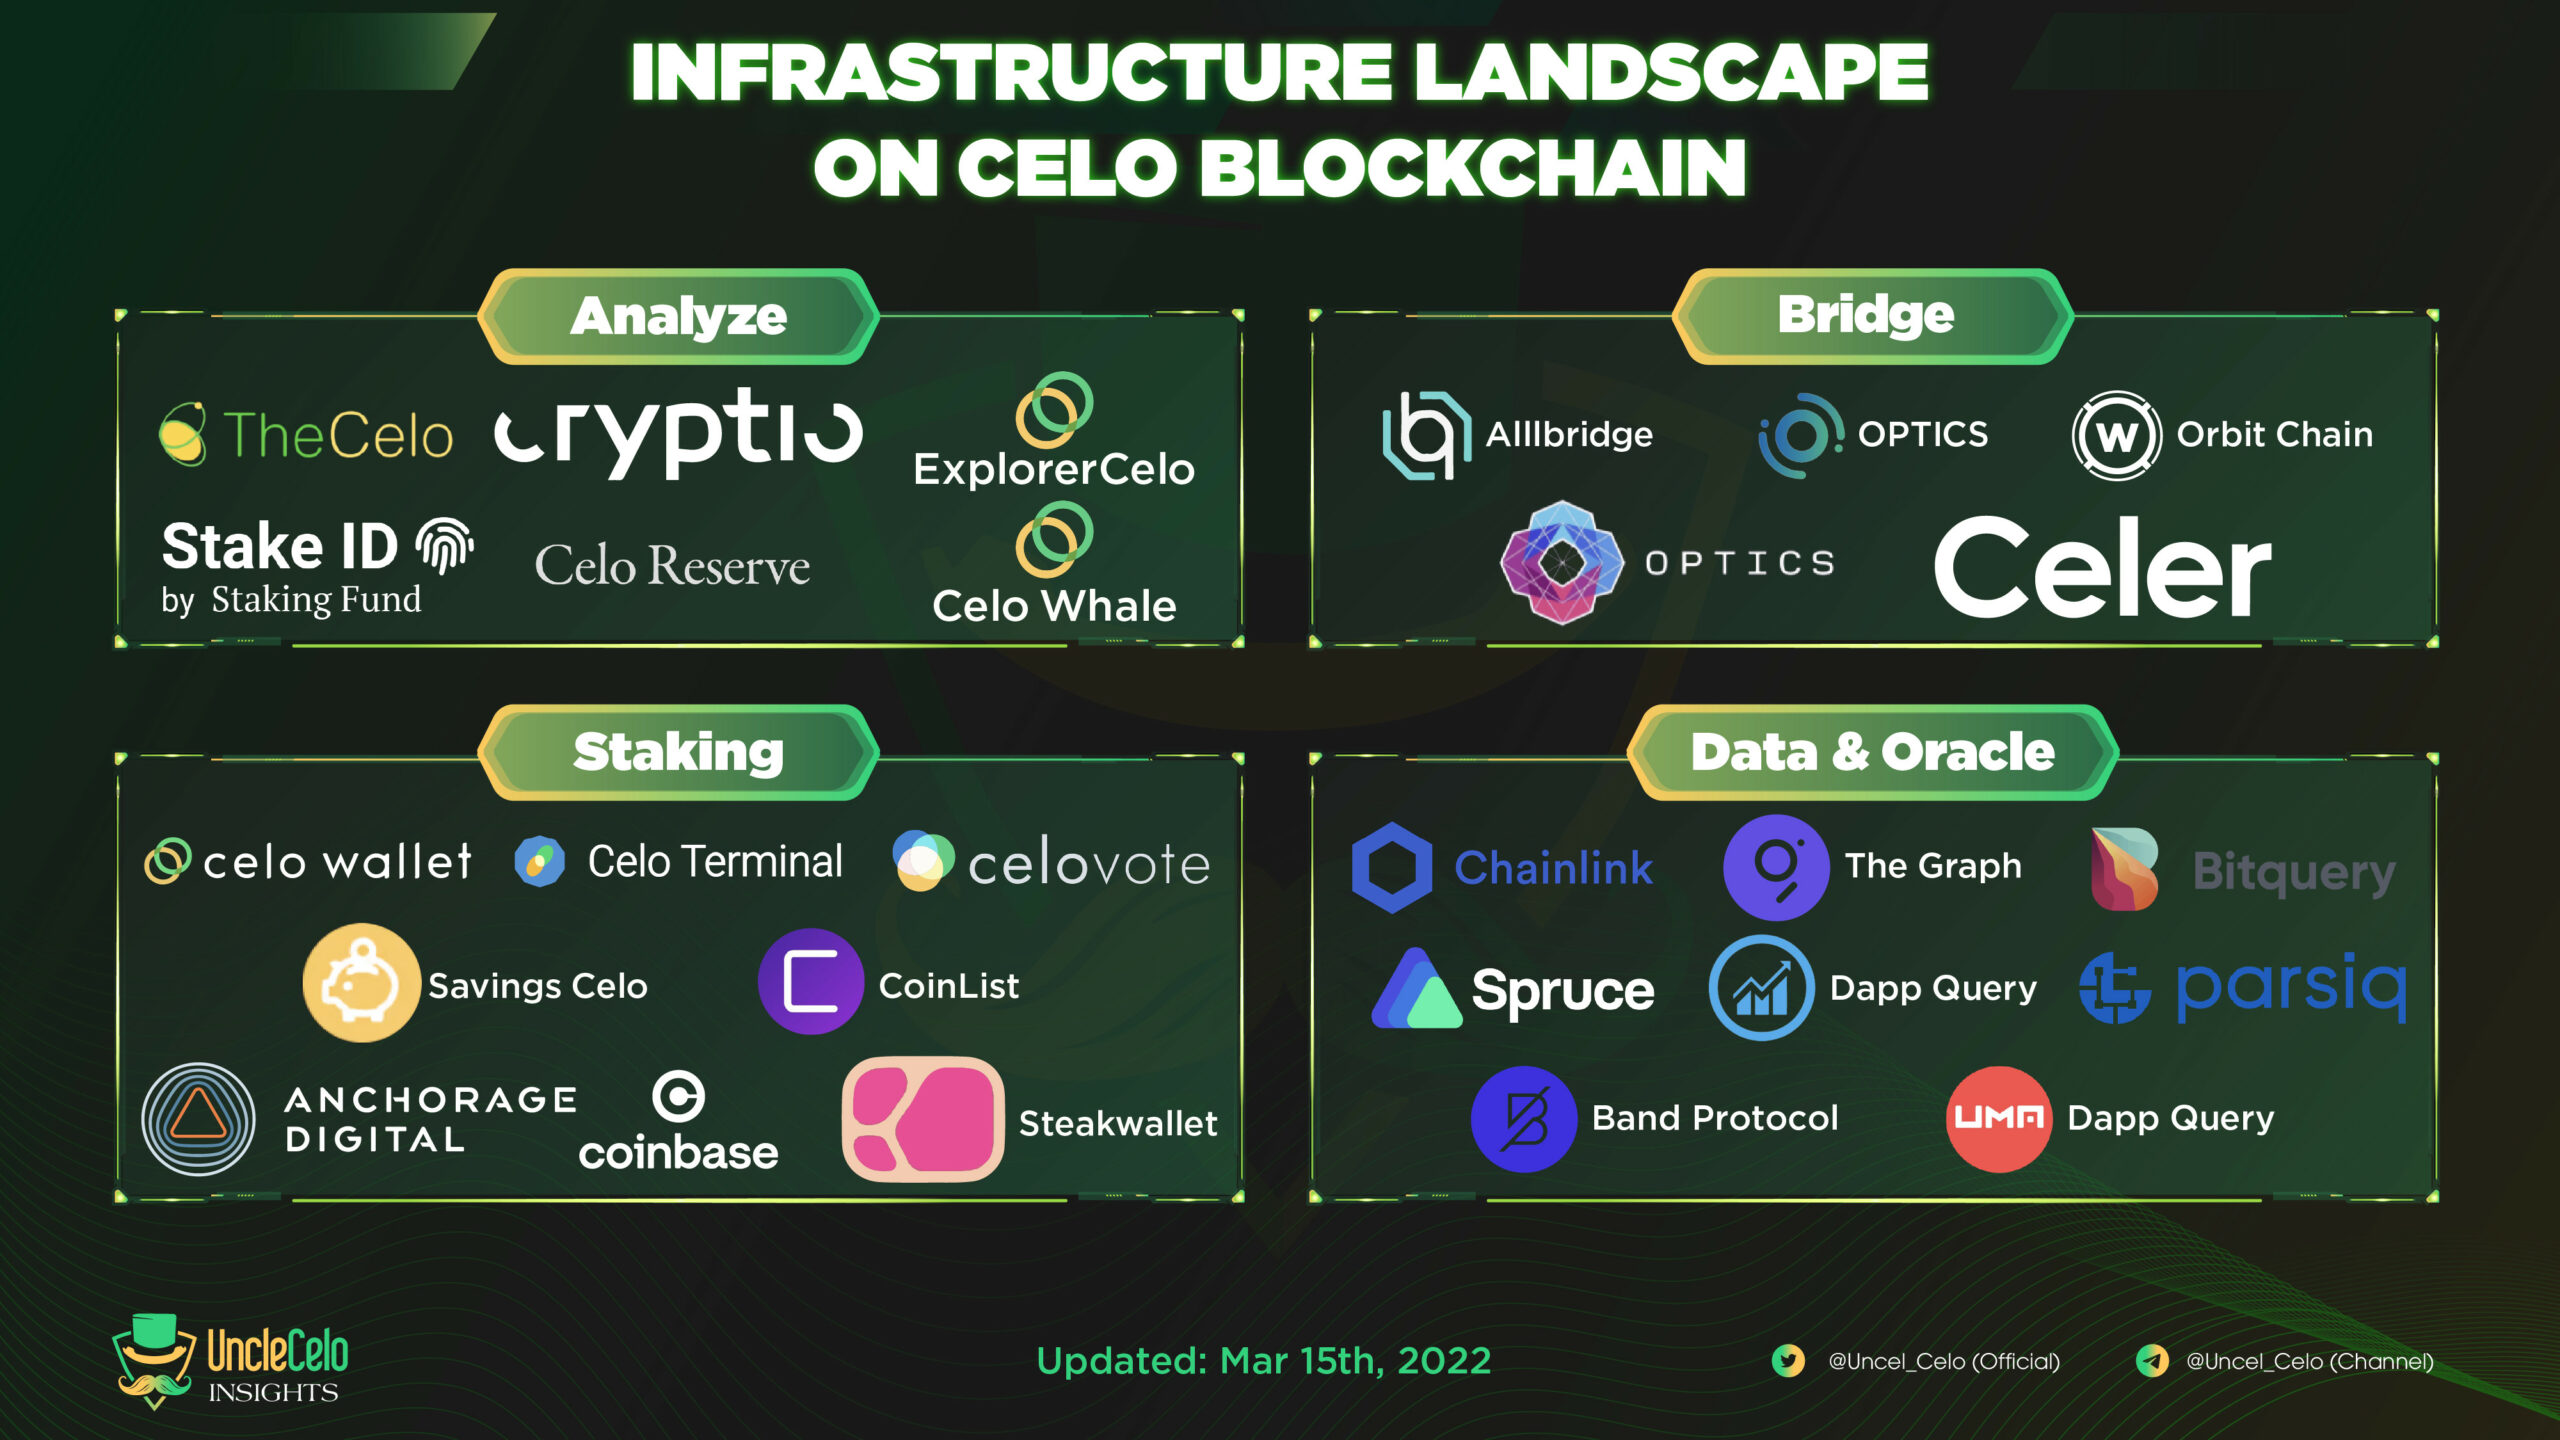 Infrastructure on Celo